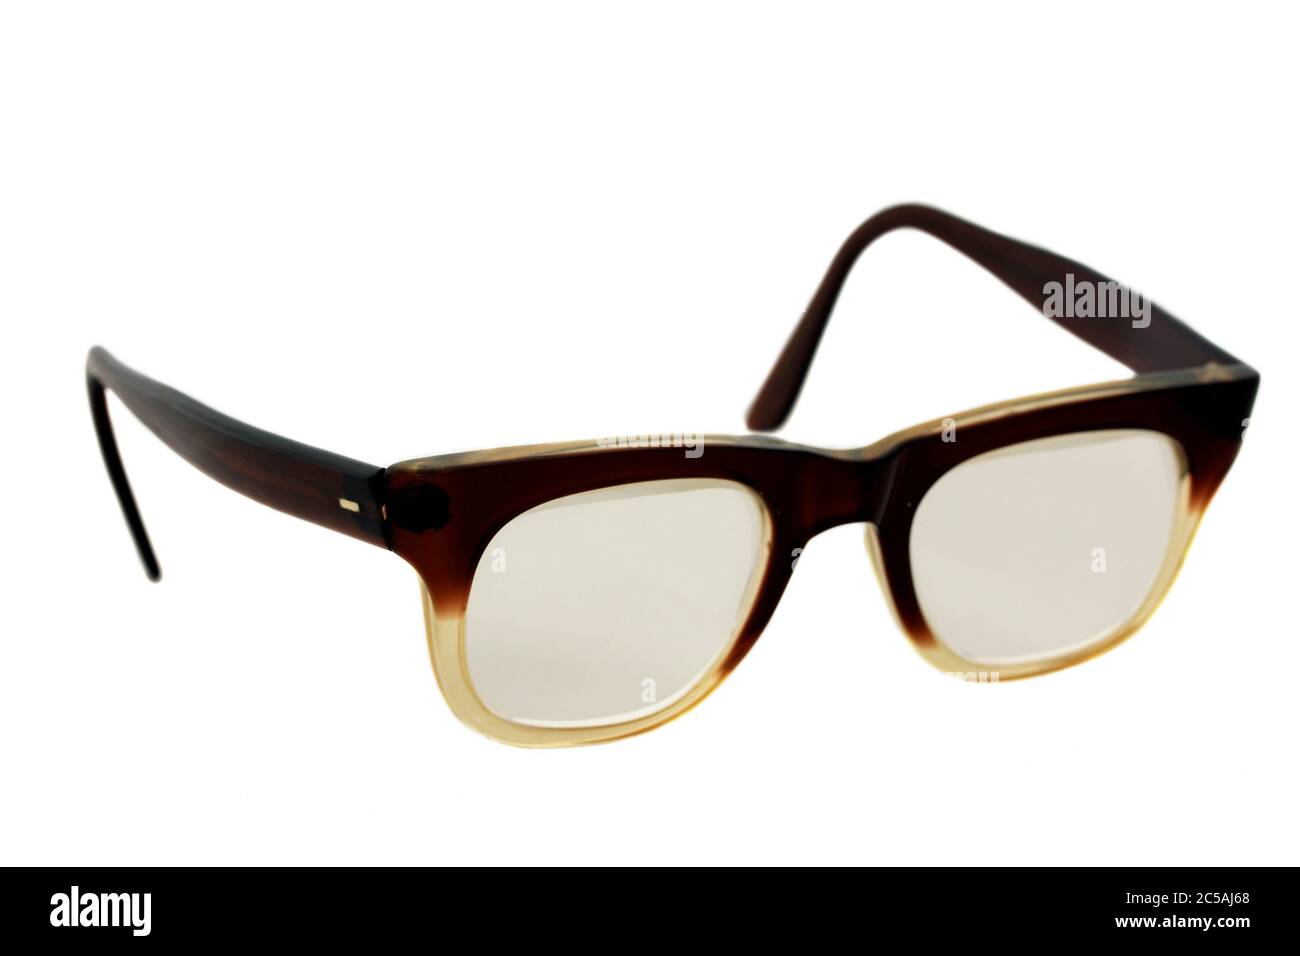 Pair of vintage glasses spectacles Stock Photo